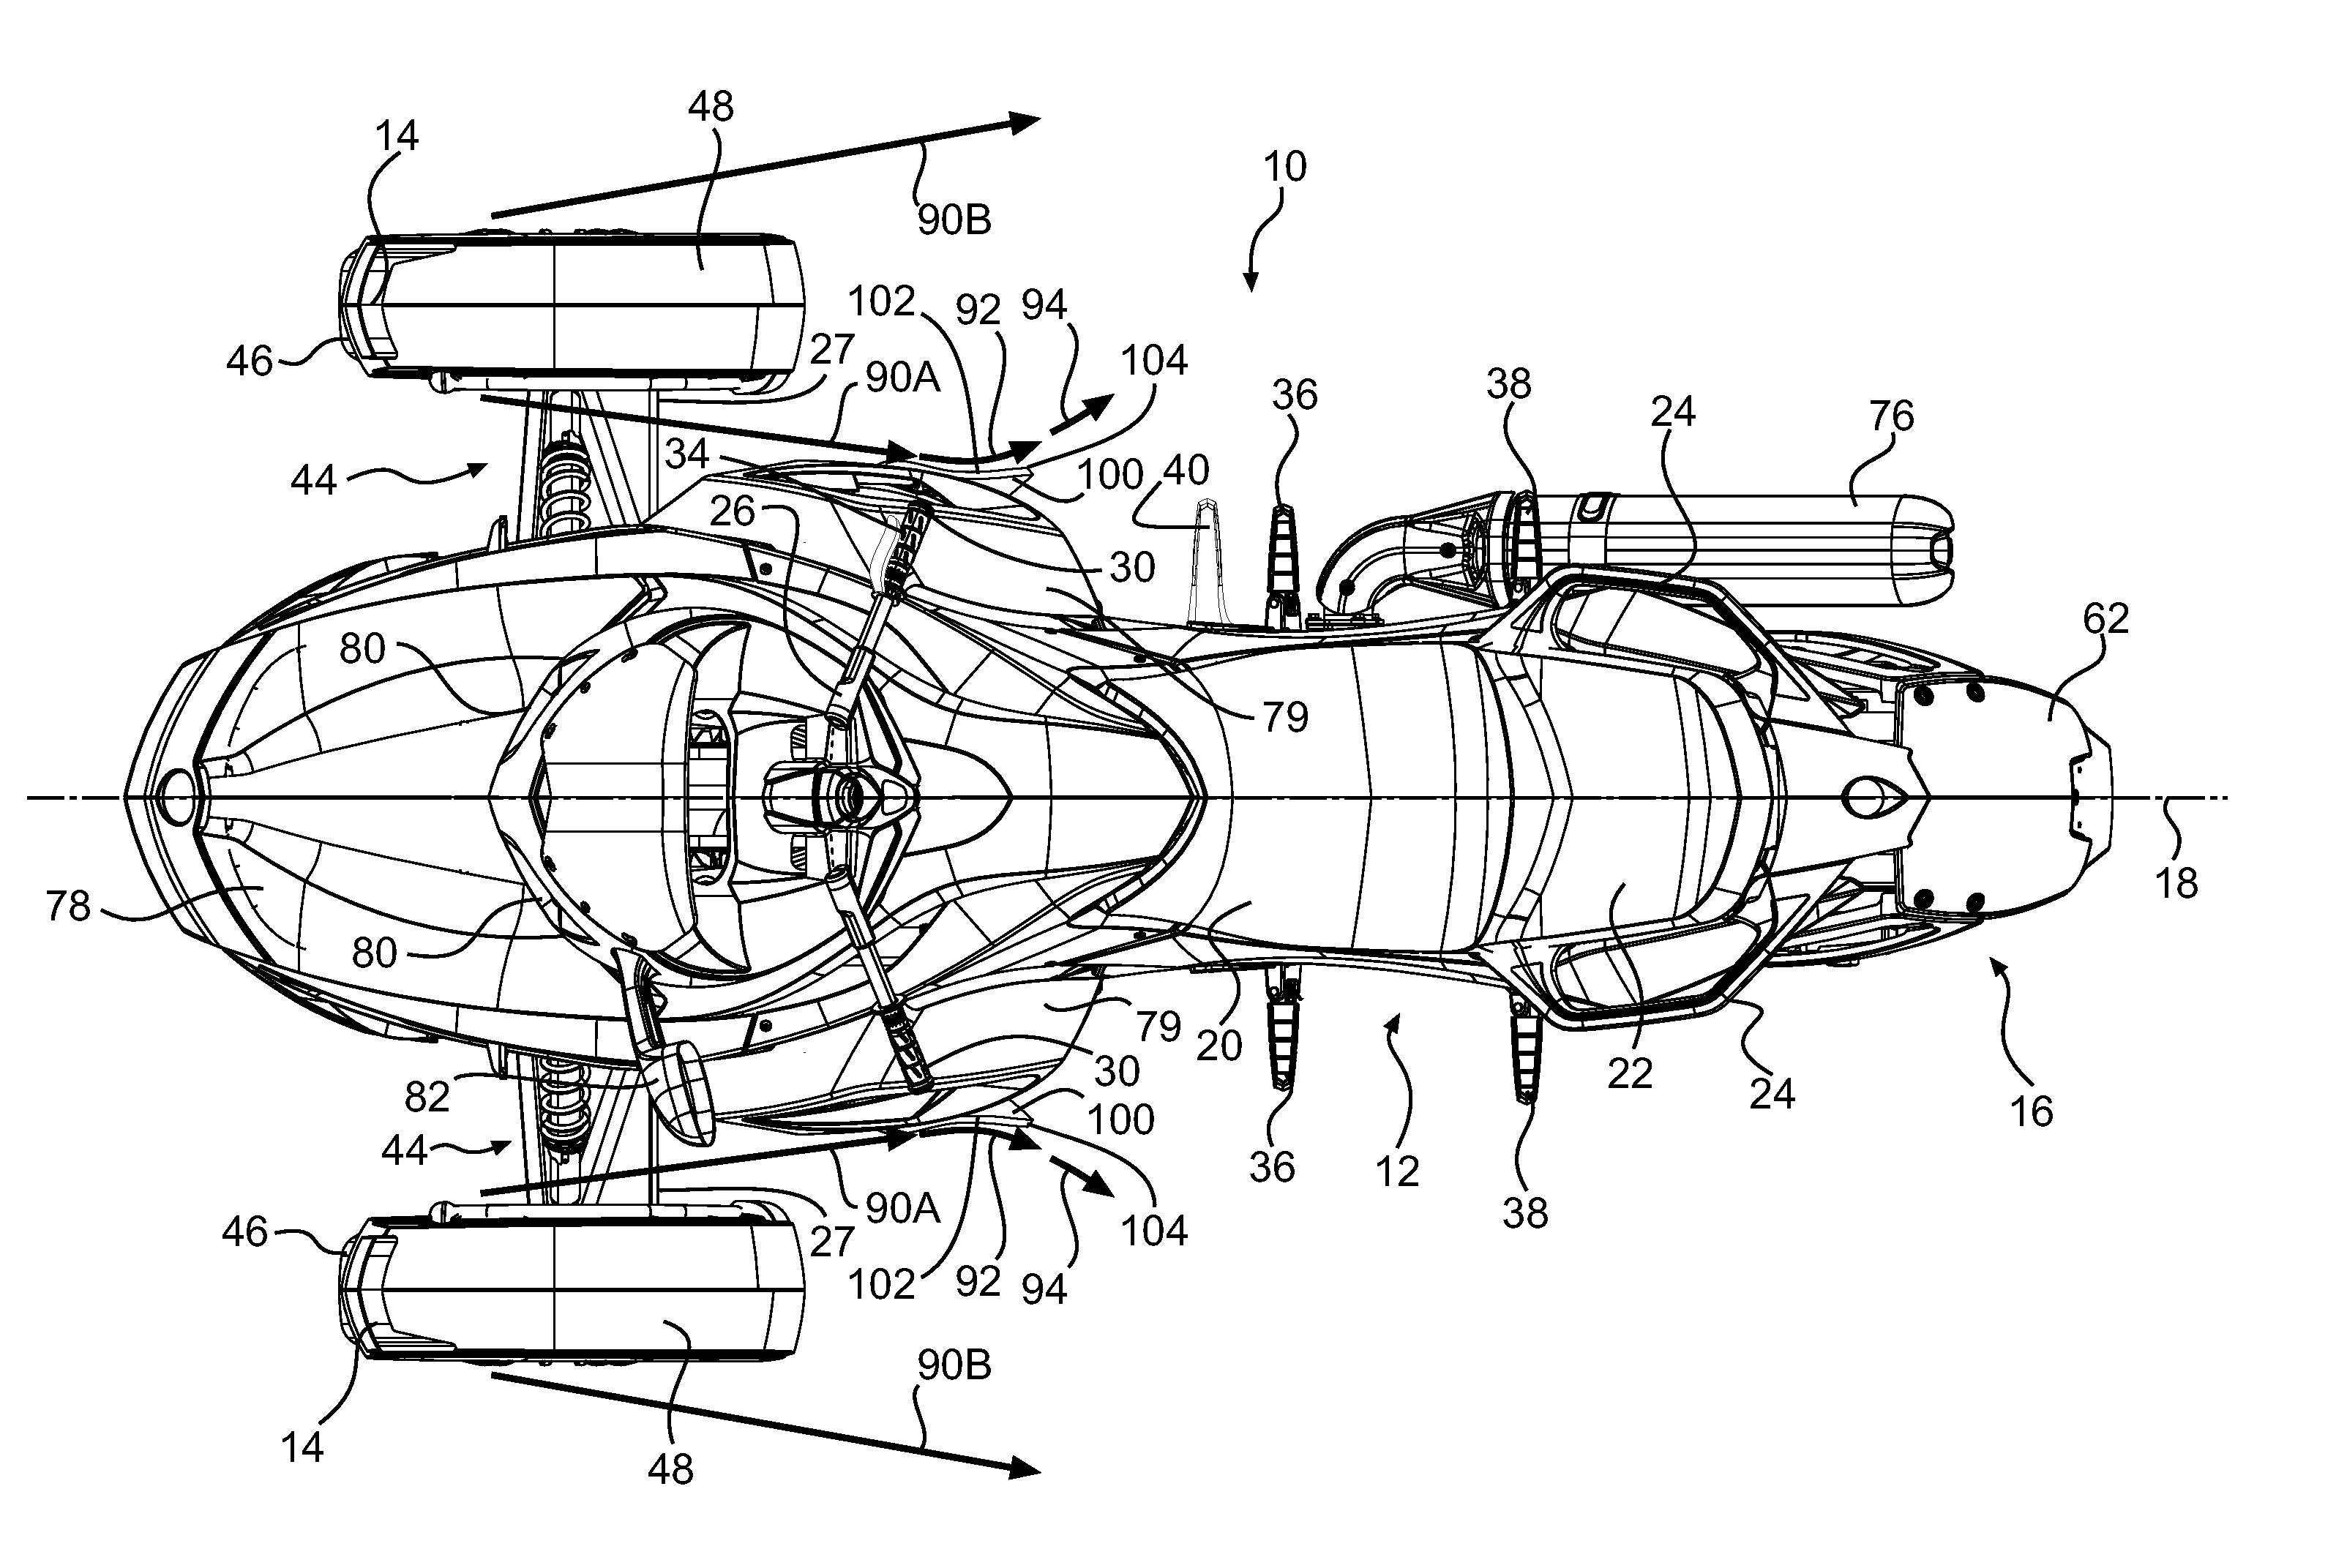 Wheeled vehicle with water deflectors